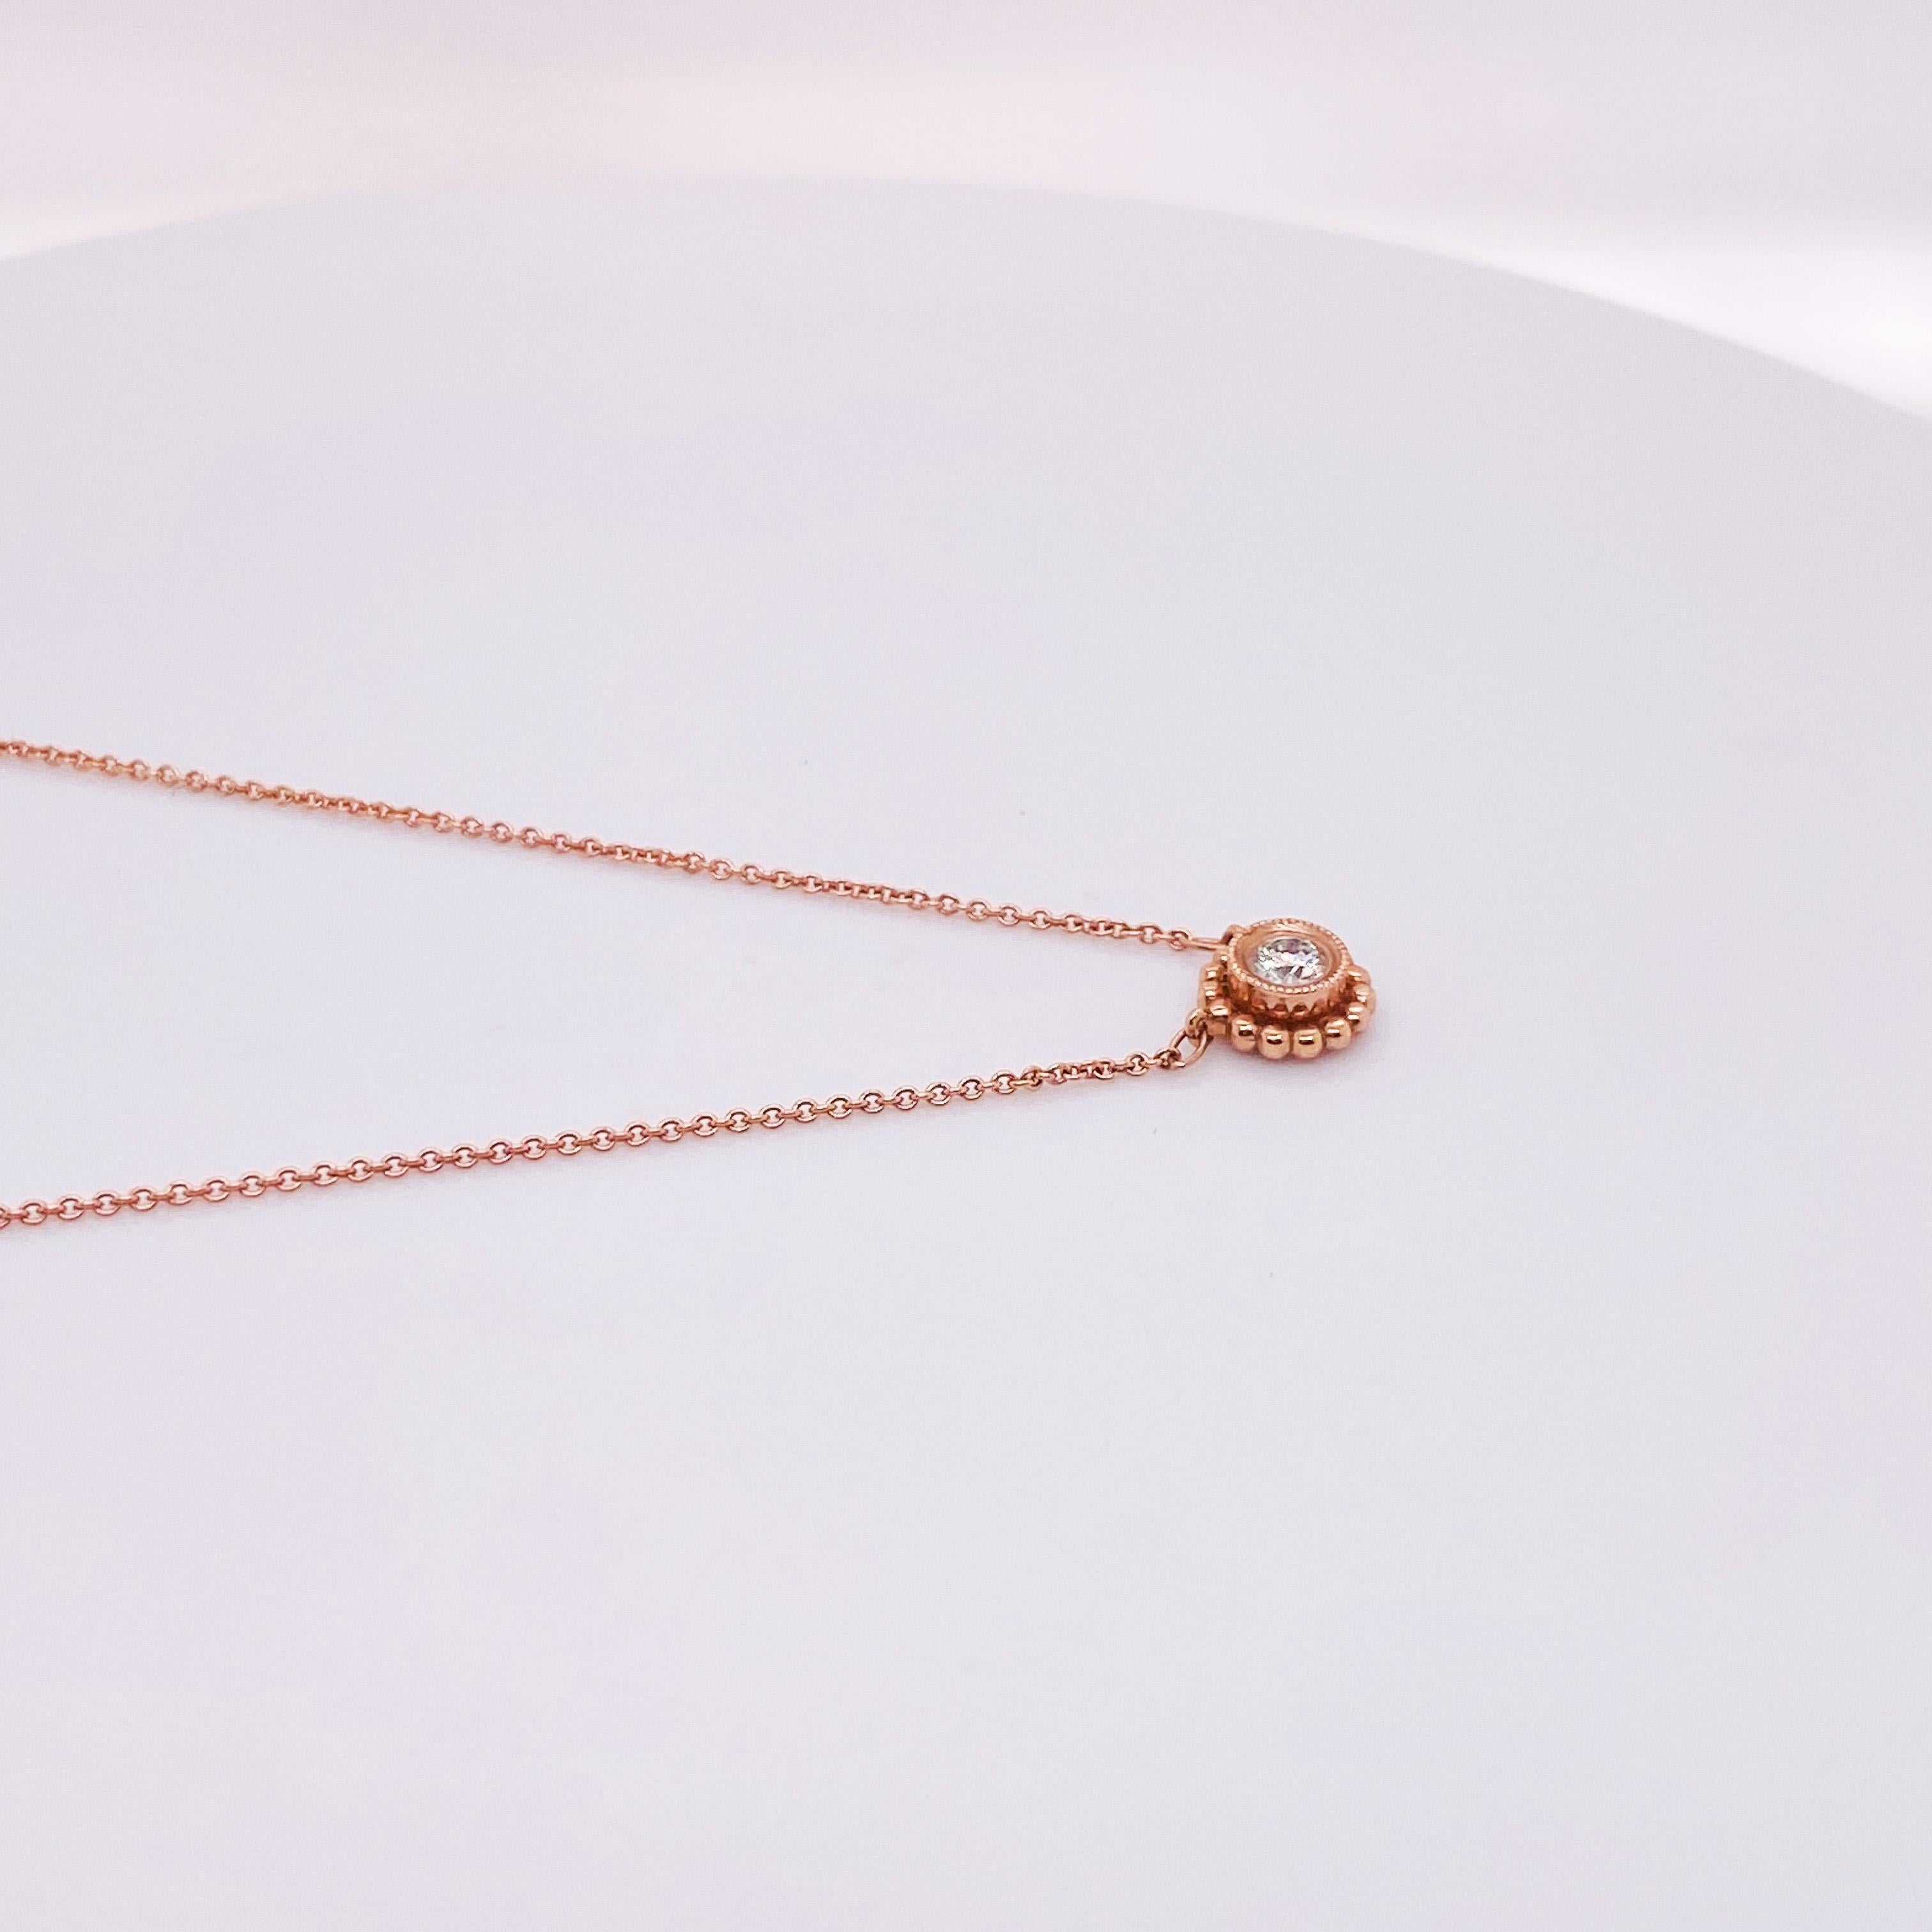 Brilliant Cut Dainty Diamond Daisy Necklace .12 Carats in 14K Rose Gold, April Birthstone LV For Sale